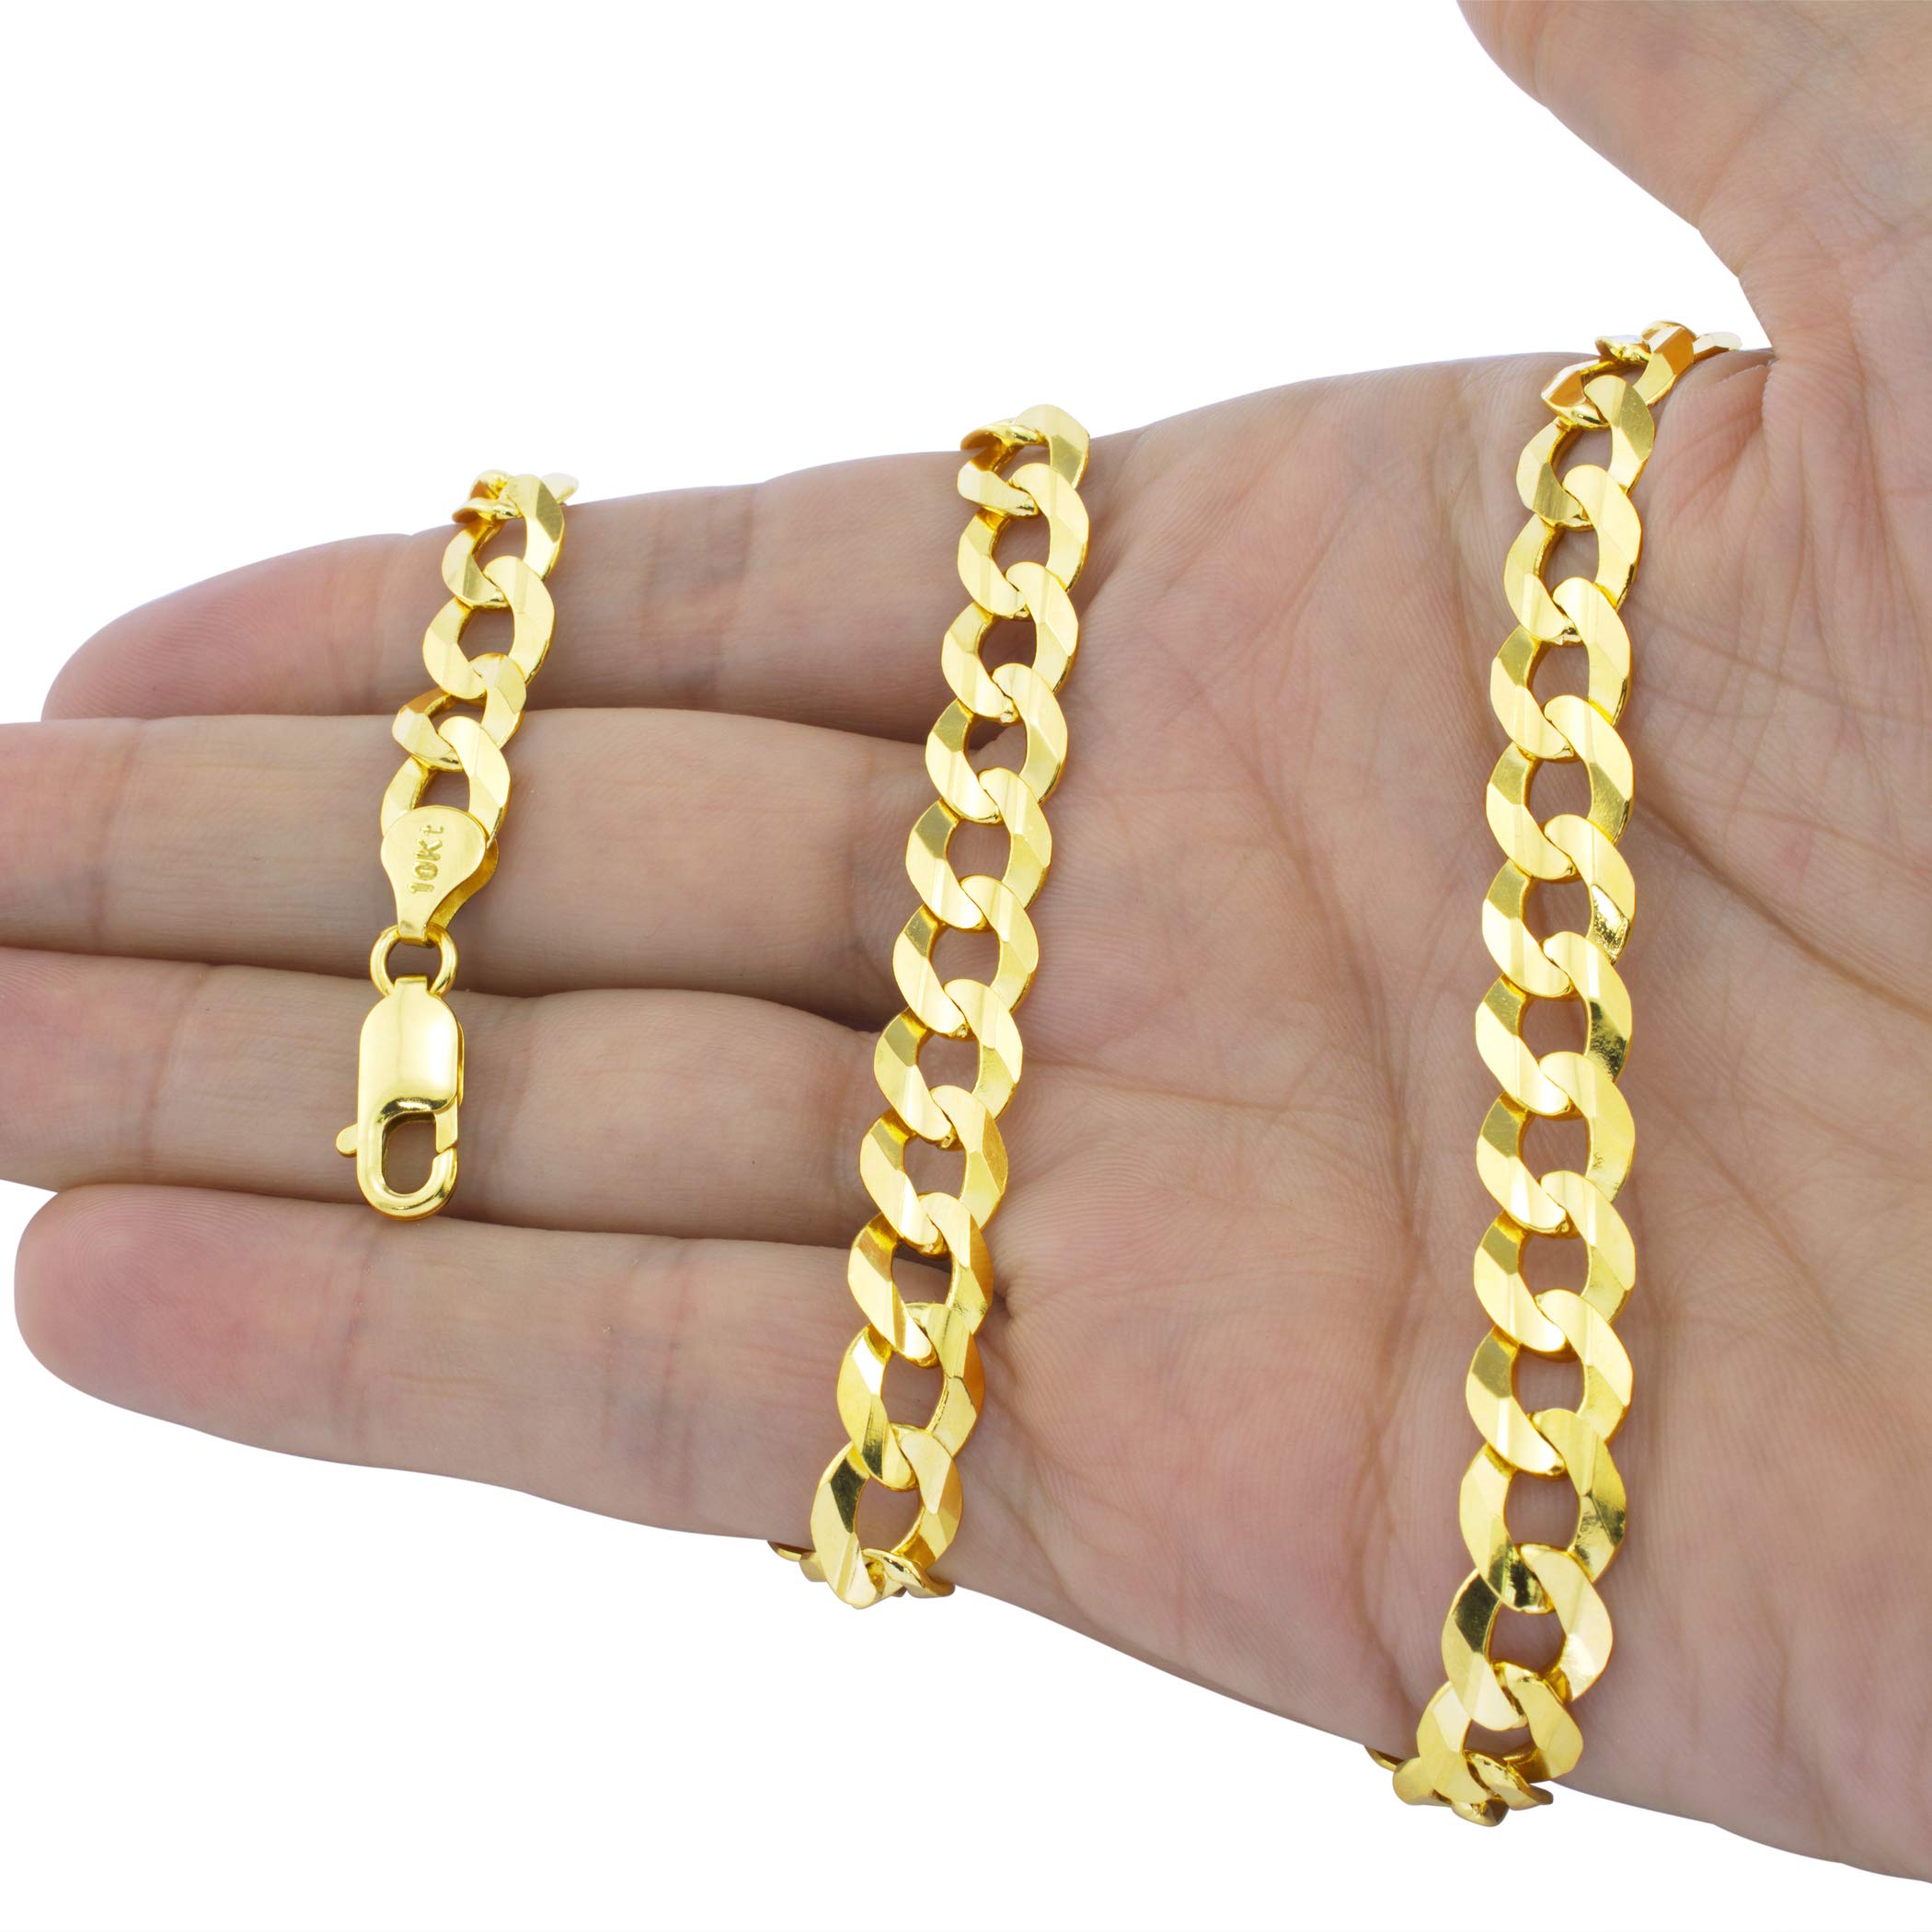 Nuragold 10k Yellow Gold 10mm Solid Cuban Curb Link Chain Bracelet, Mens Jewelry 7